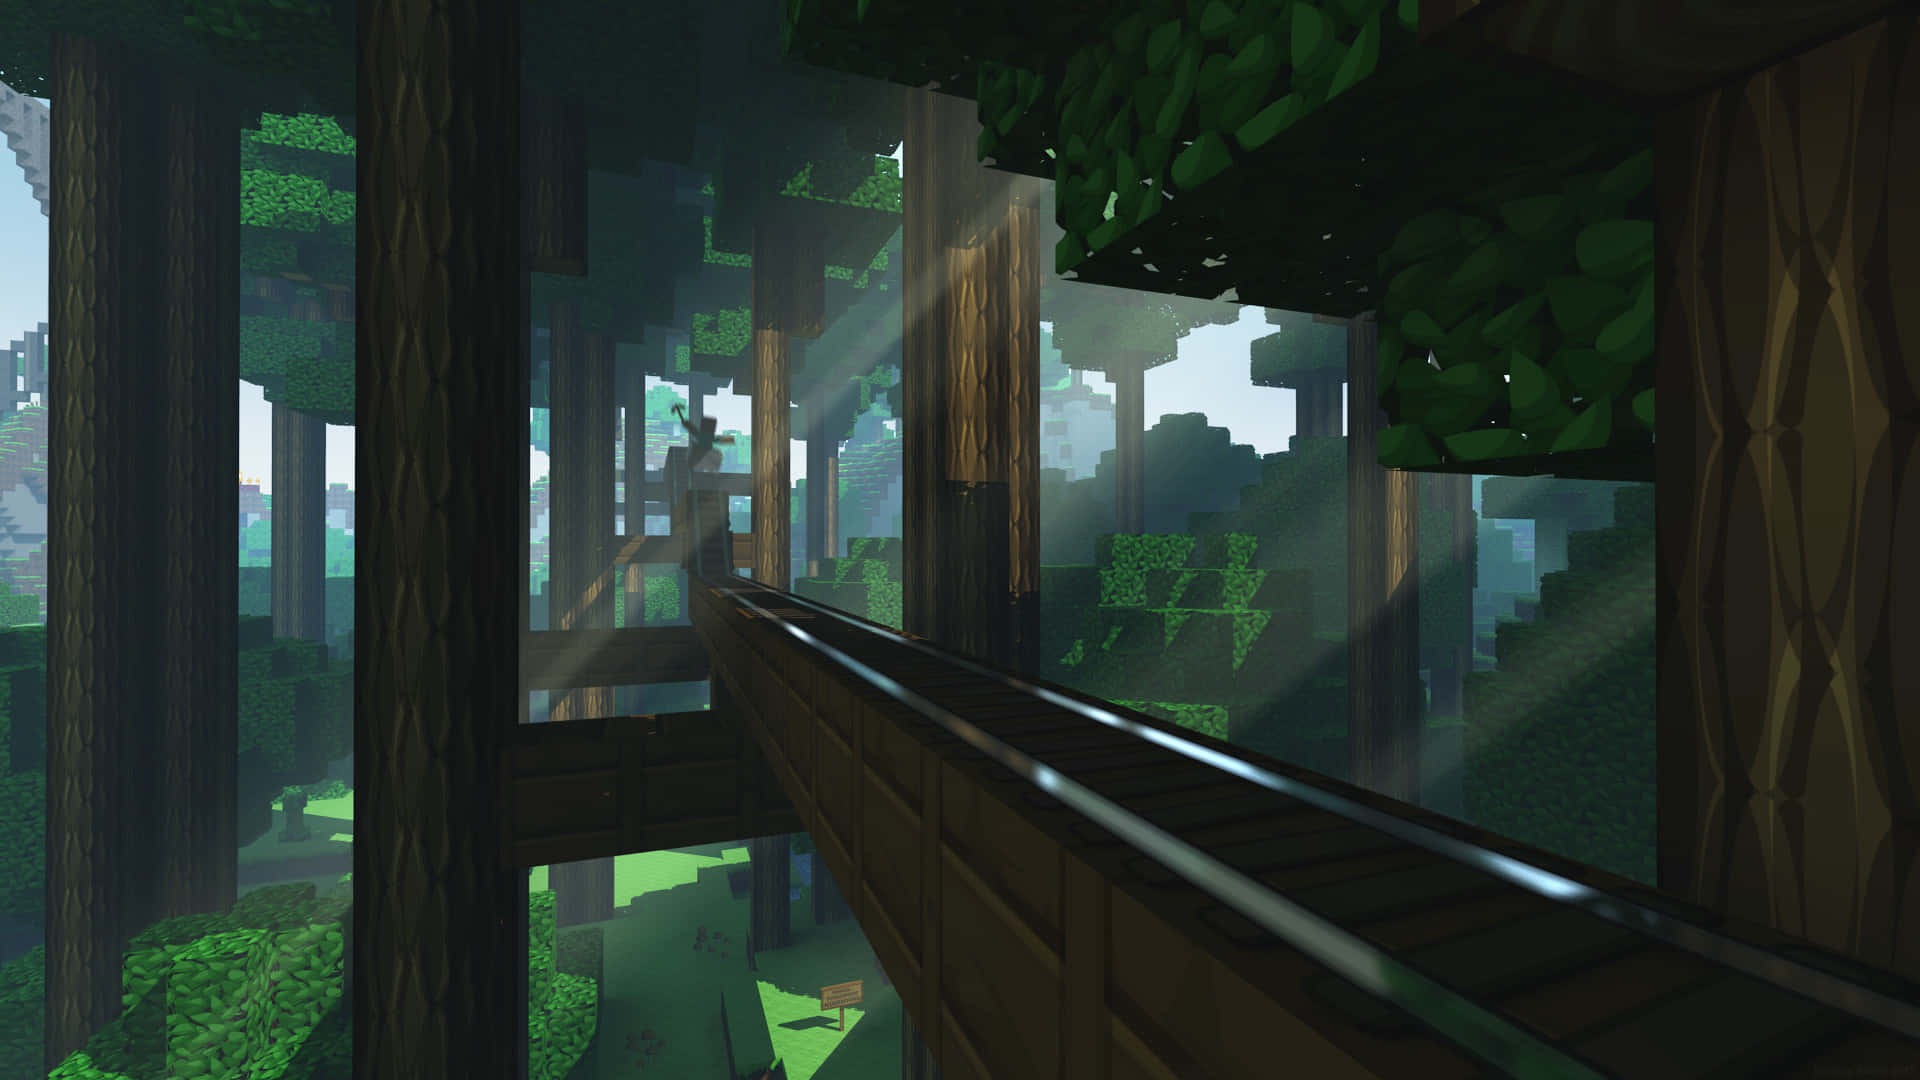 A Screenshot Of A Minecraft Game With A Train In The Forest